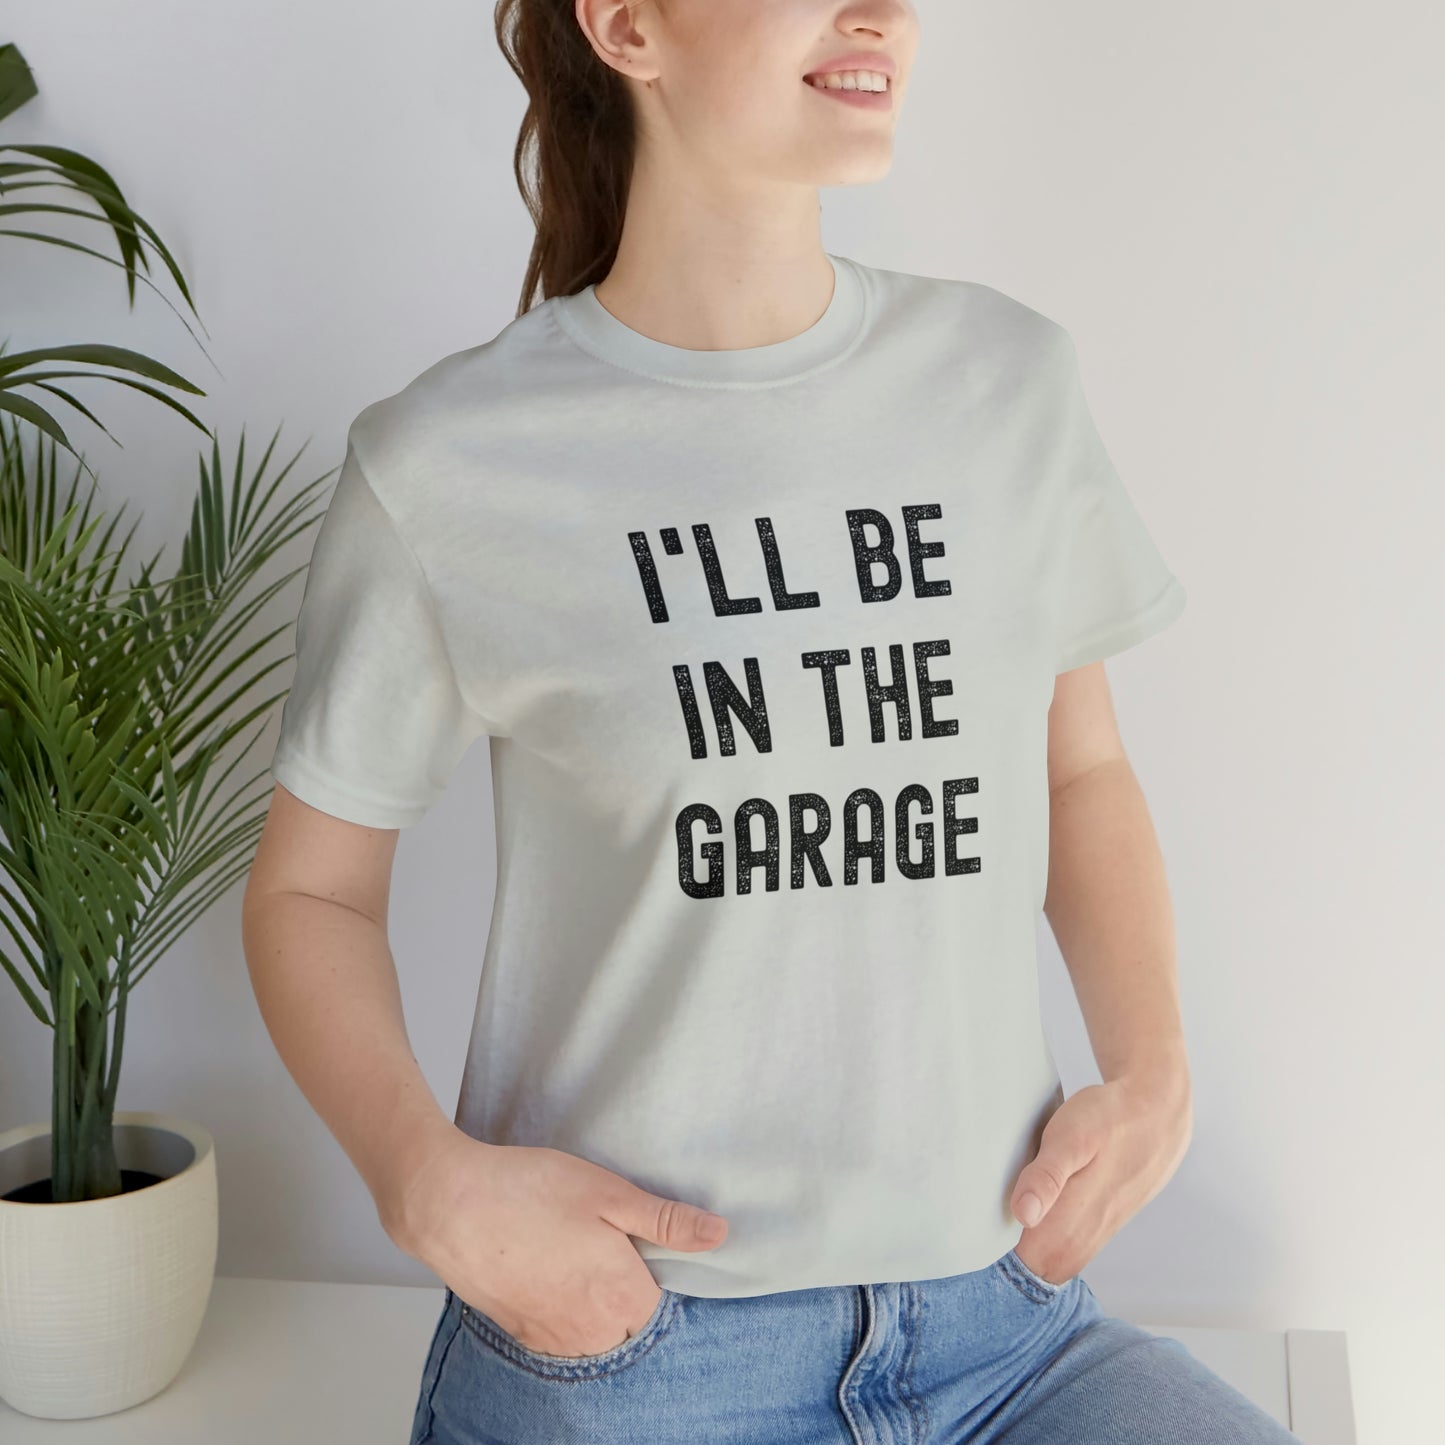 I'll Be In the Garage- Unisex Jersey Short Sleeve Tee